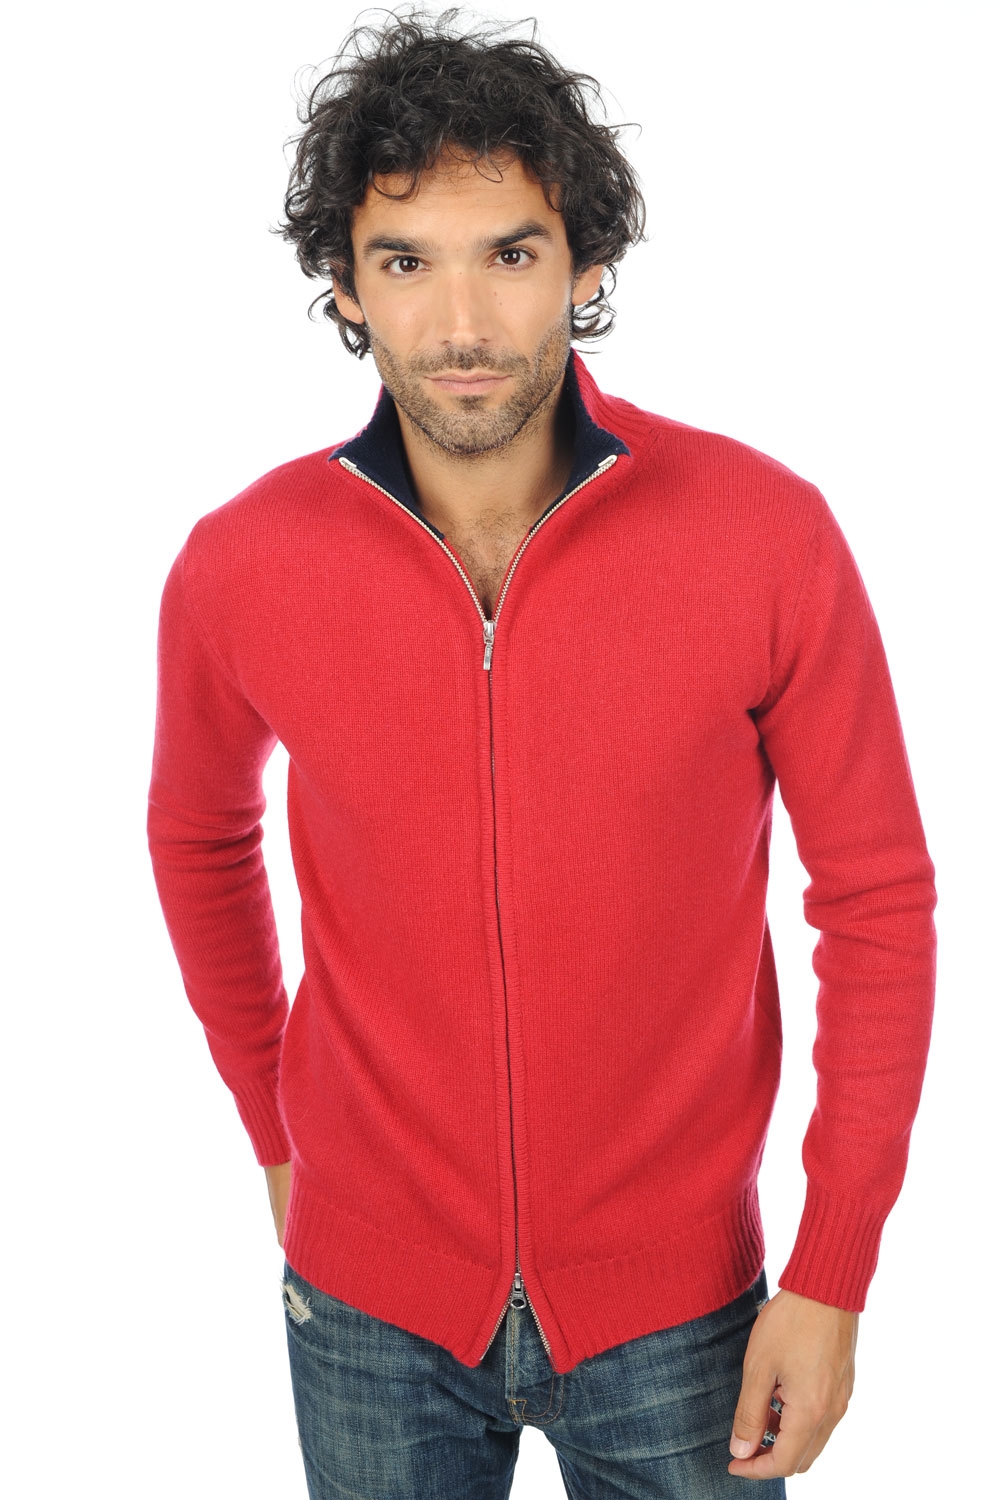 Cachemire pull homme maxime rouge velours marine fonce 2xl